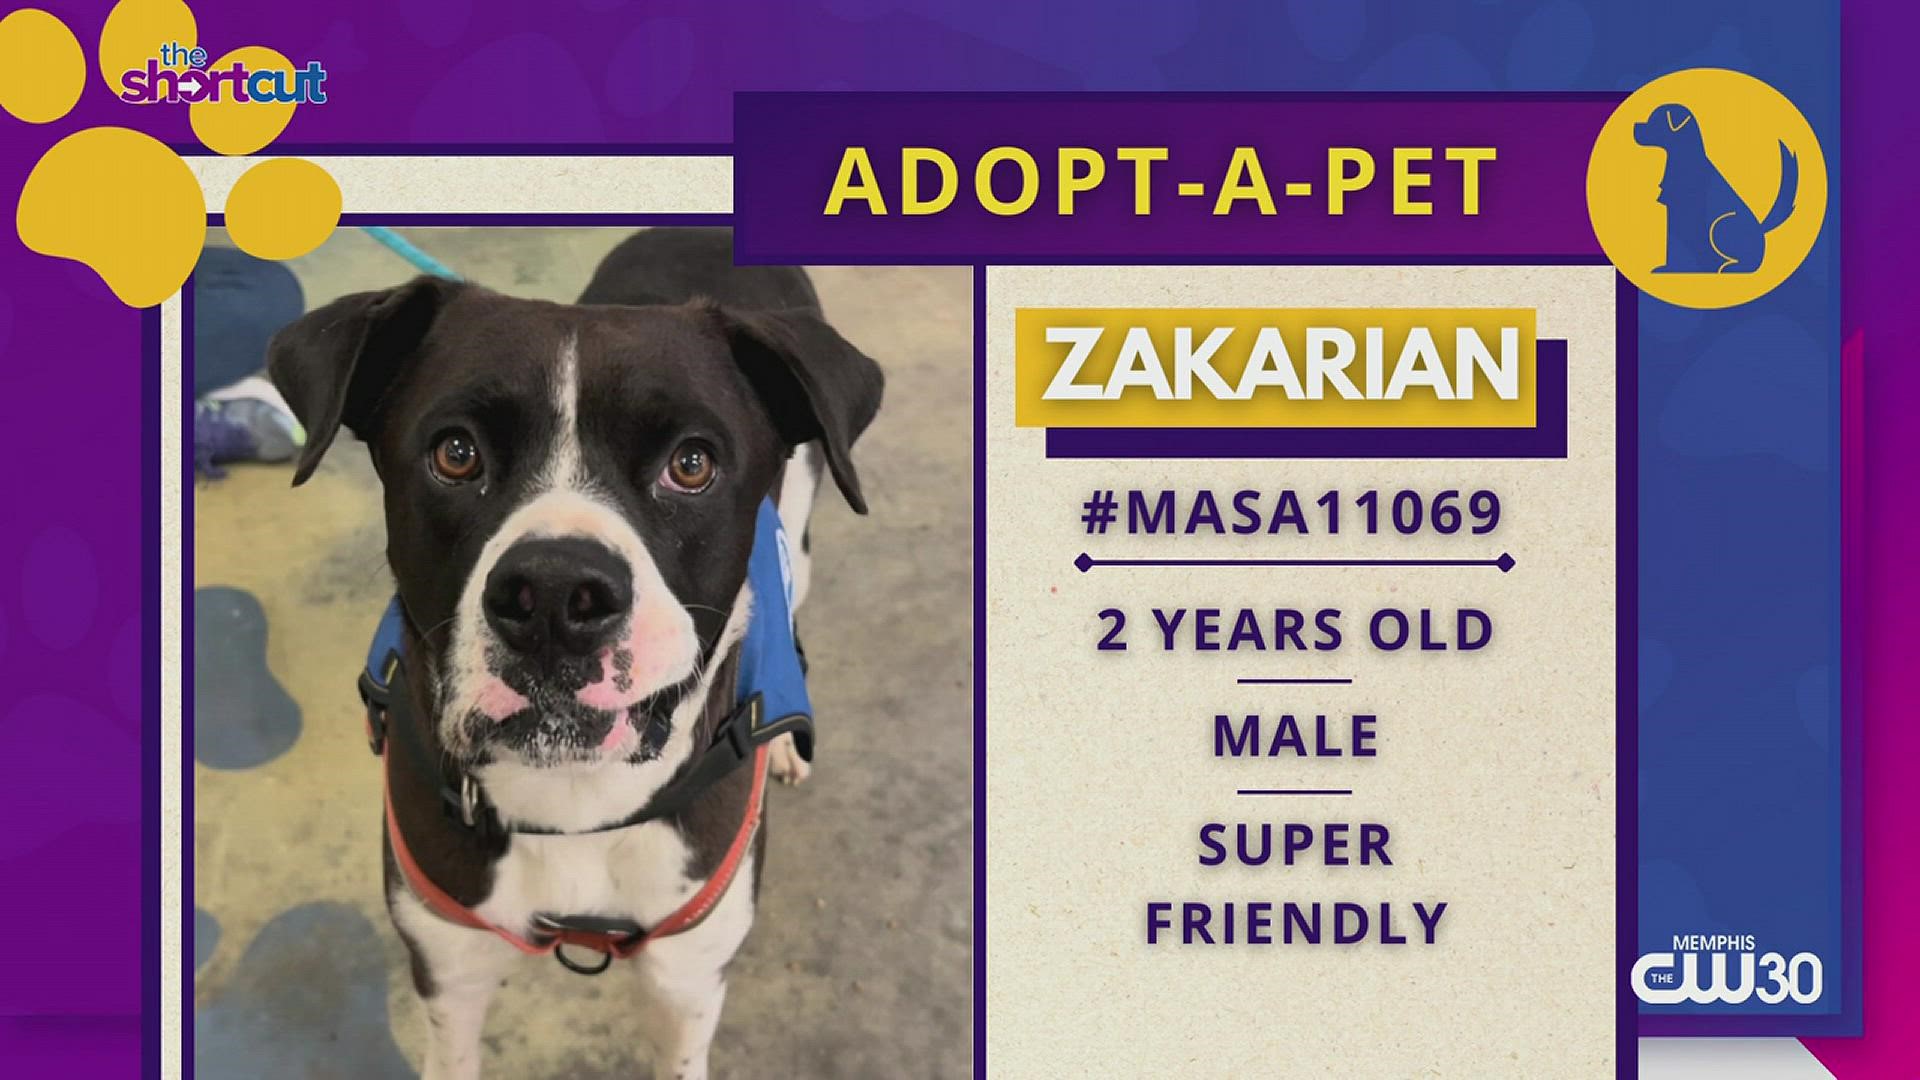 If you're looking for the ultimate Netflix and chill sort of dog at Memphis Animal Services, then meet Zakarian "Zeke!" He's a super calm, well-behaved dog.